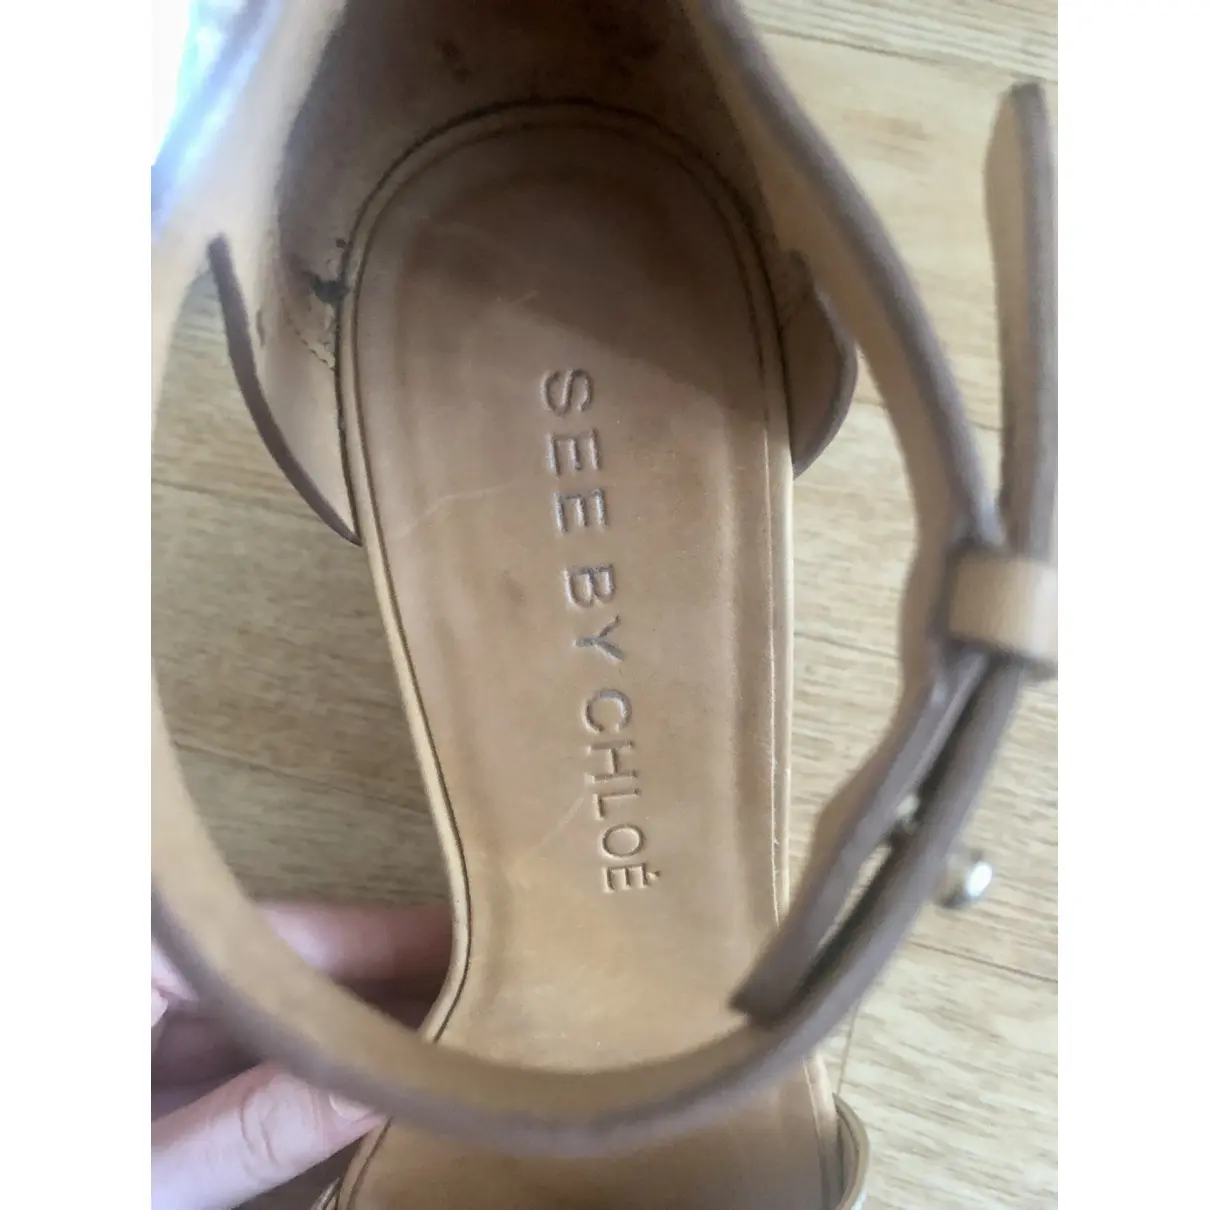 Buy See by Chloé Leather sandals online